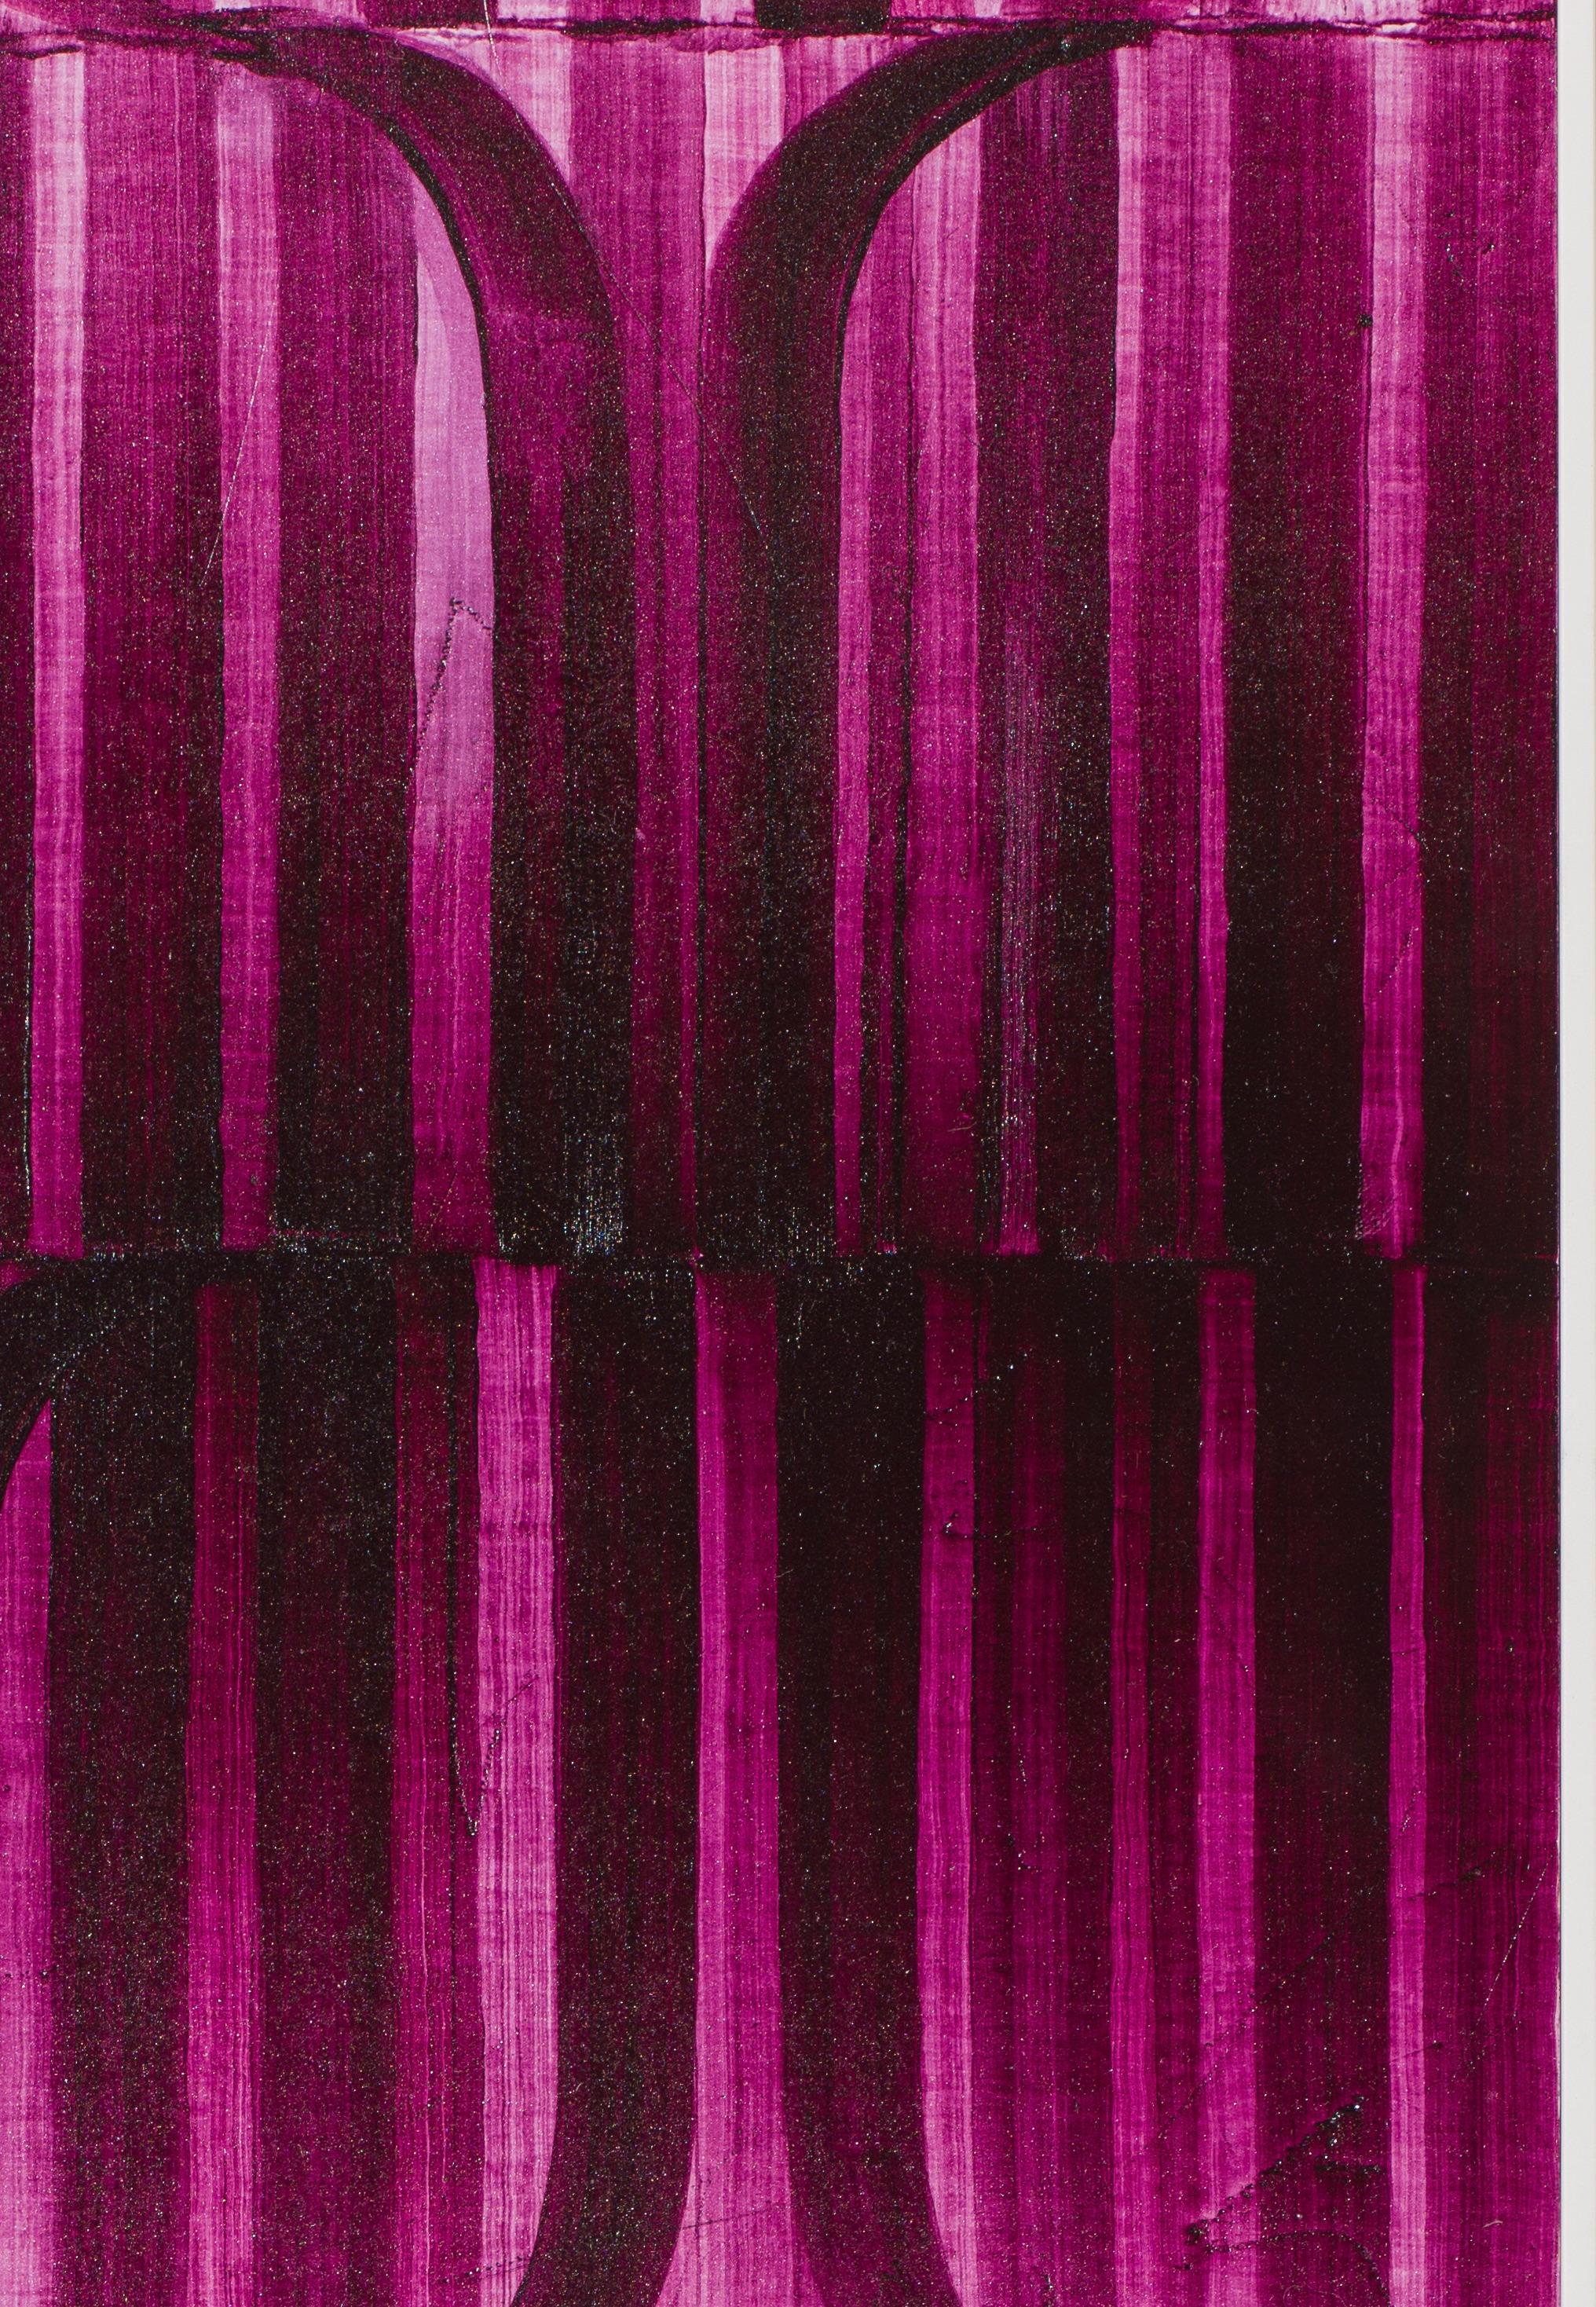 Violet #7 - Abstract Painting by Michael Marlowe